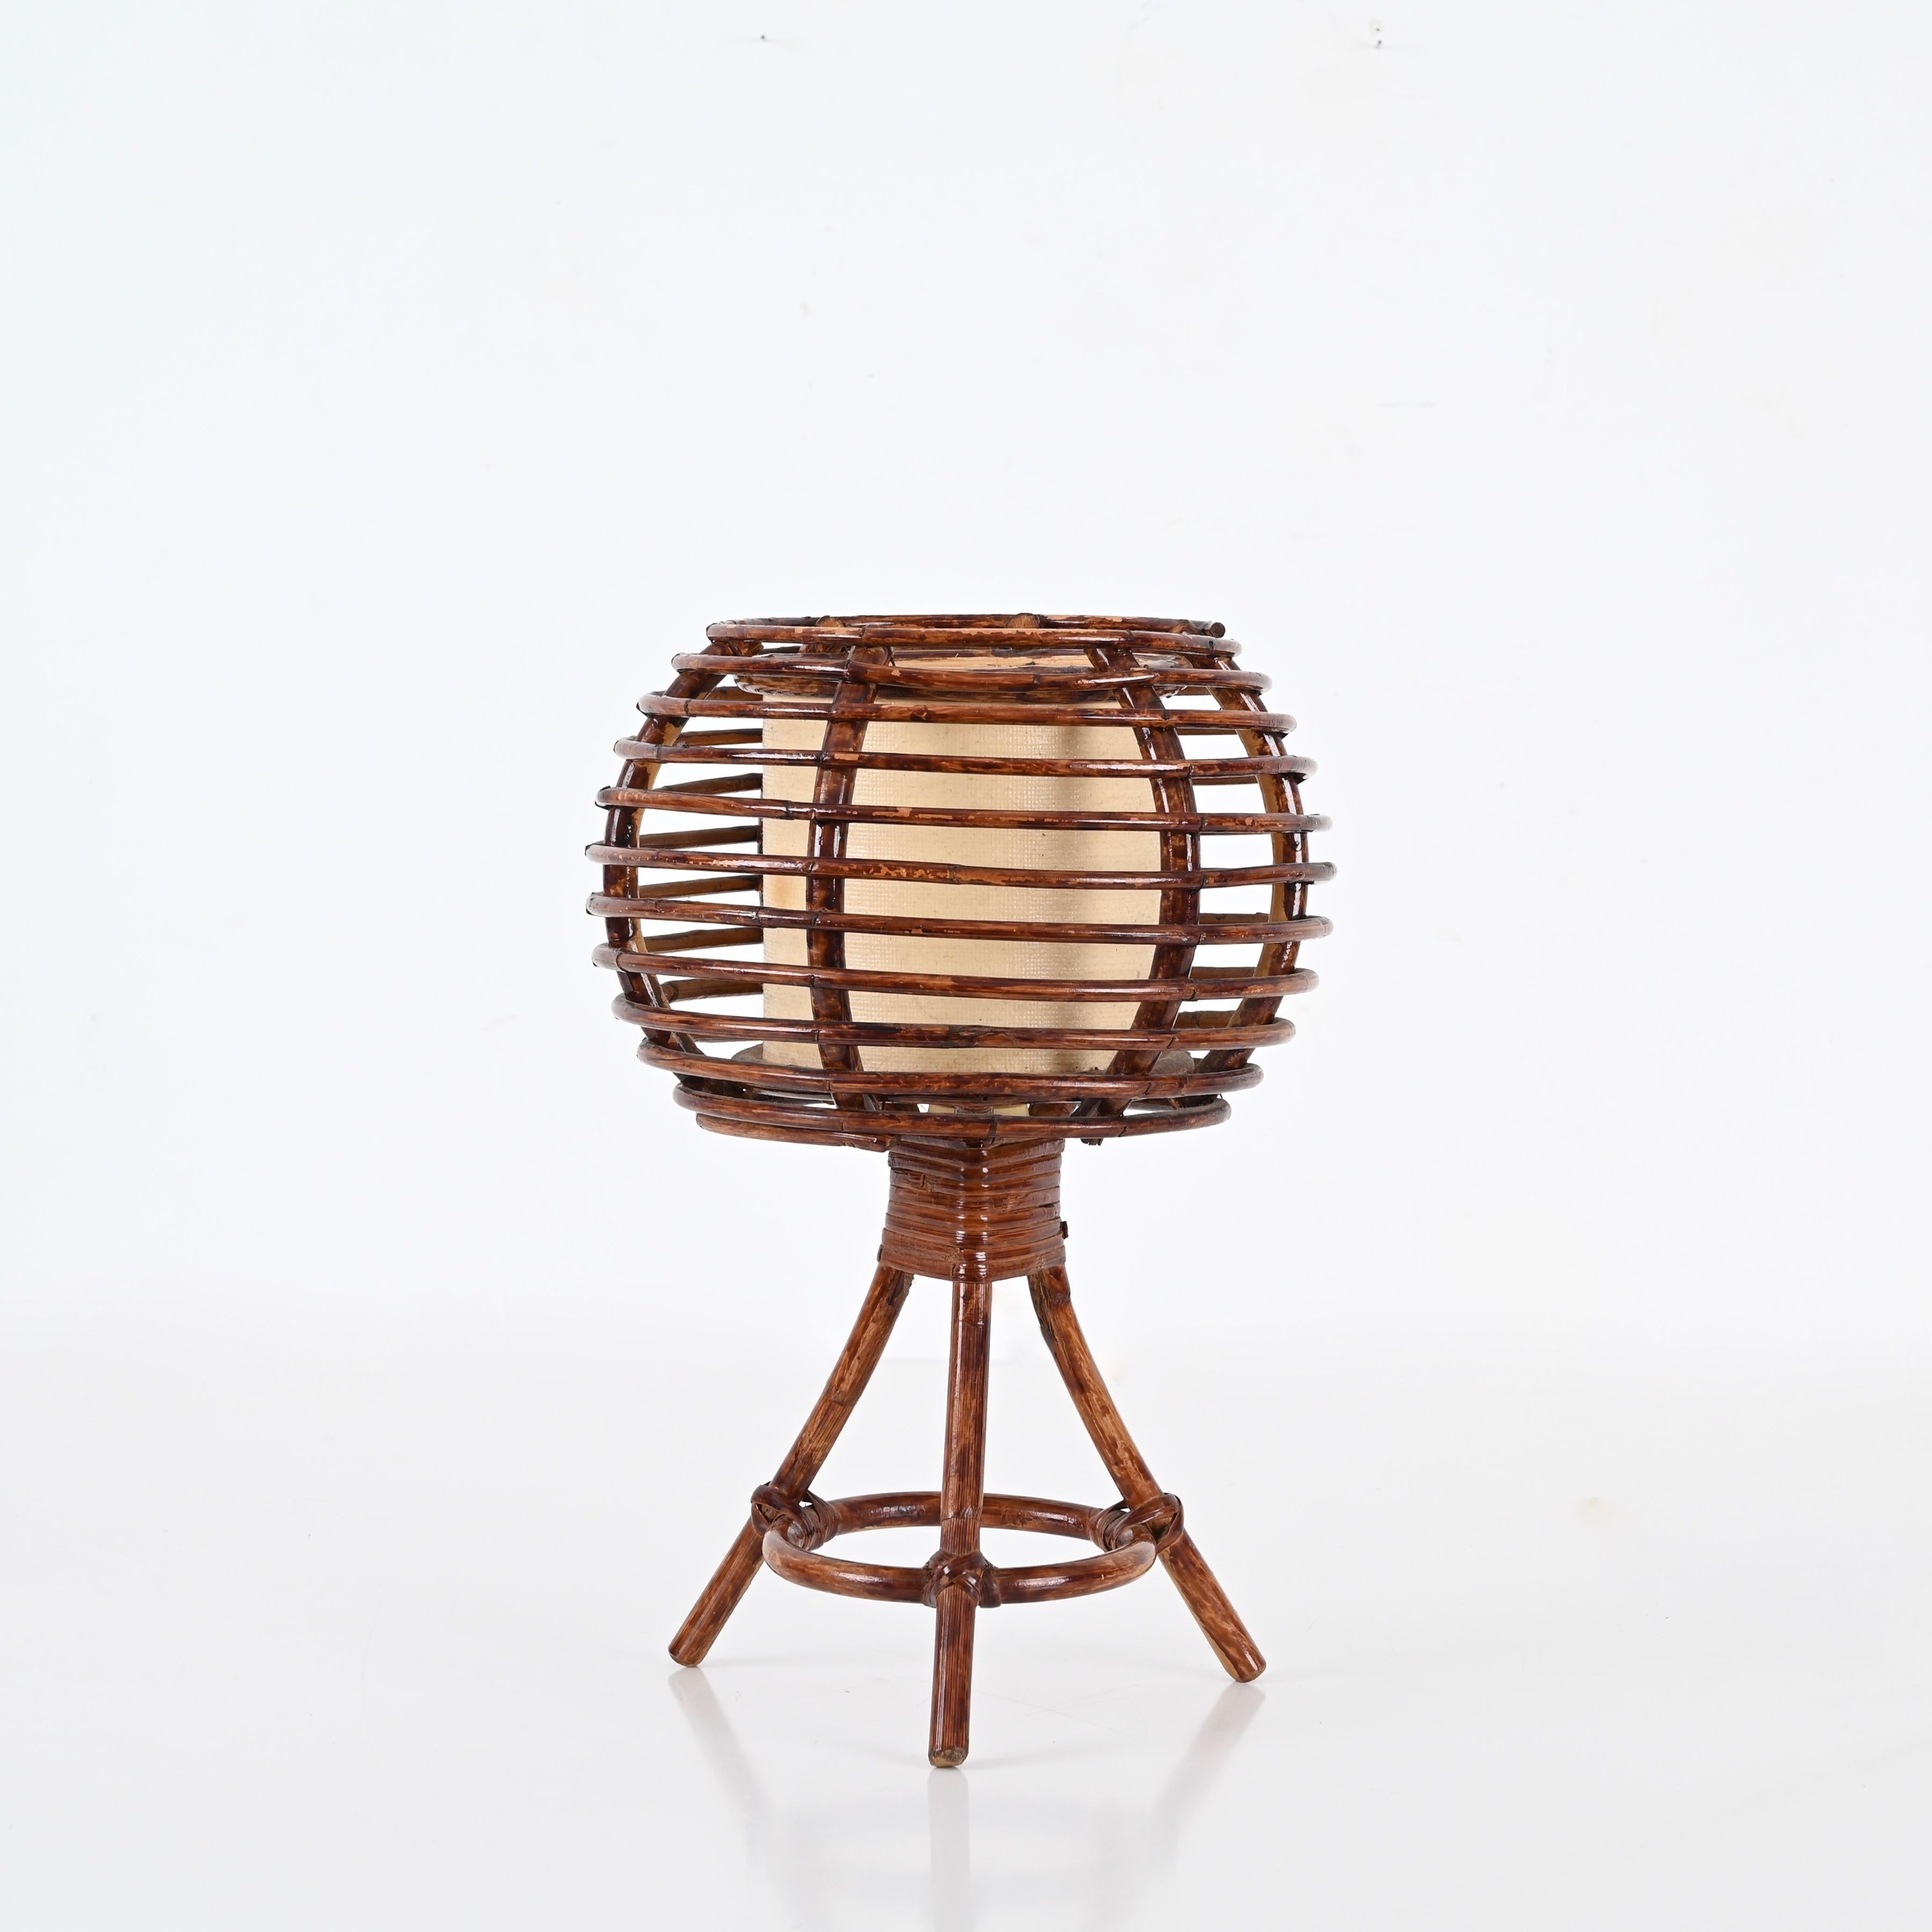 20th Century Louis Sognot Round Table Lamp in Rattan, Wicker, Beige Lampshade, France 1960s